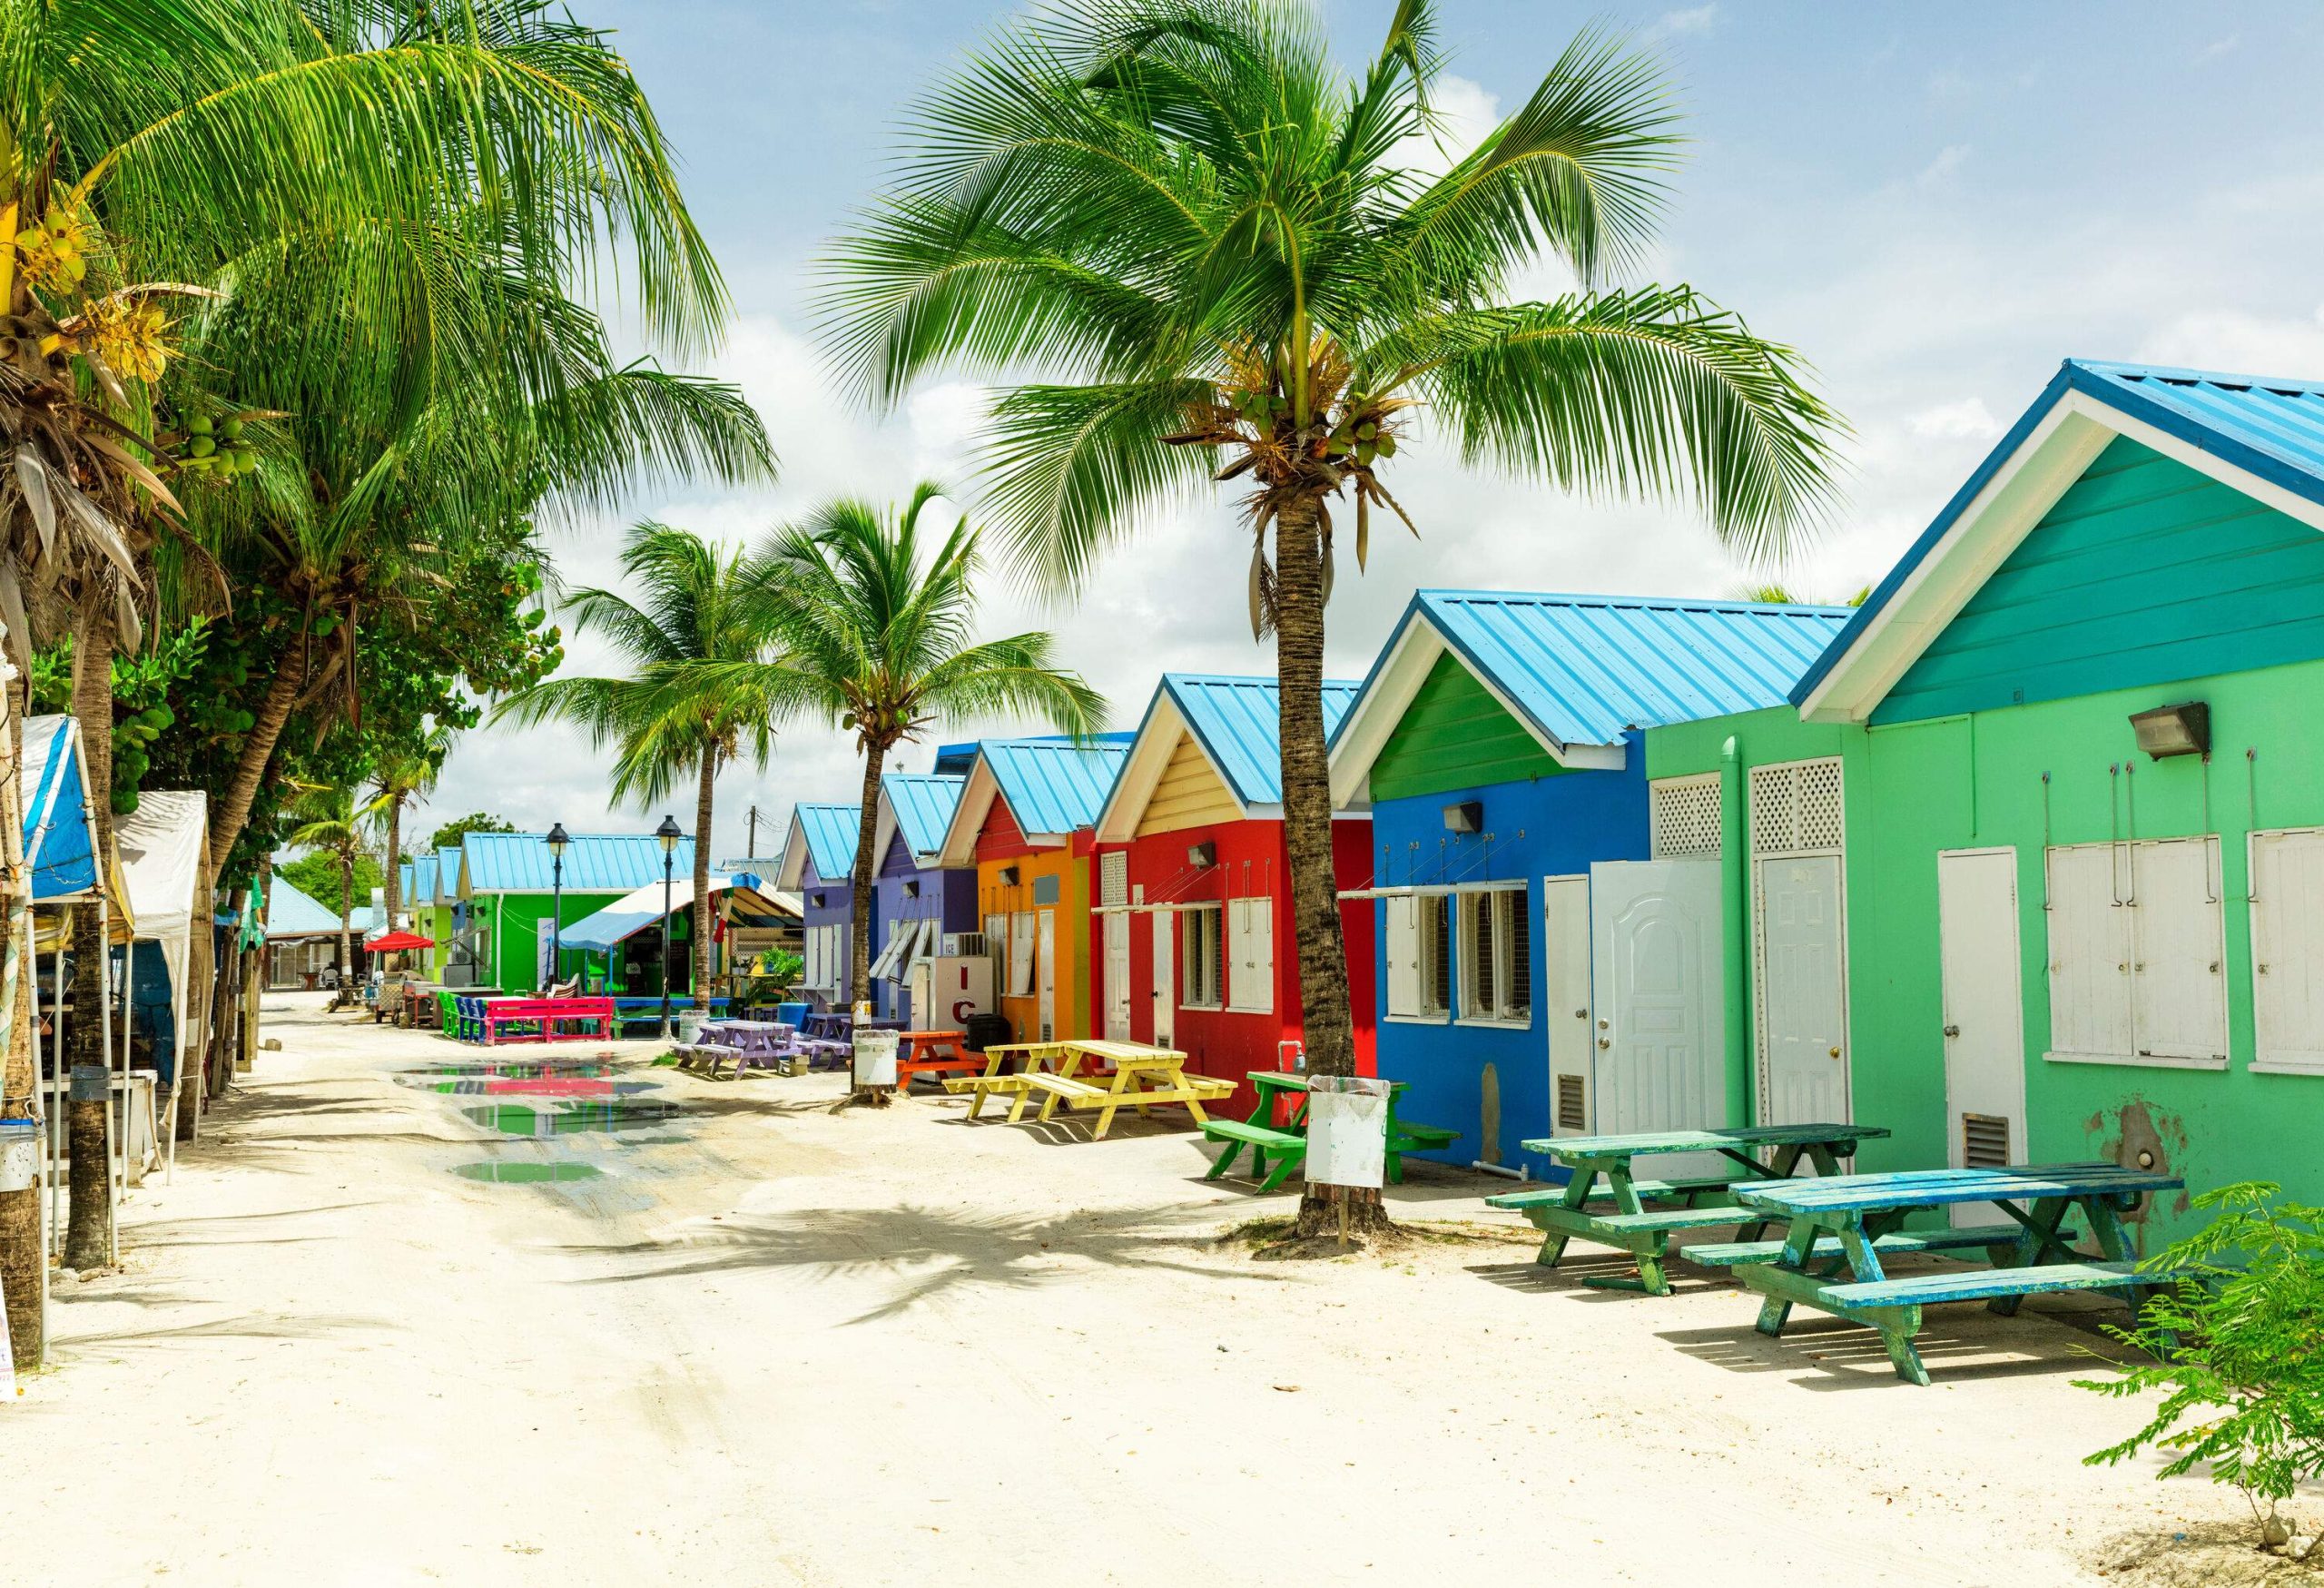 Rows of colourful houses gracefully perch on the soft white sand, while swaying palm trees dot the landscape.